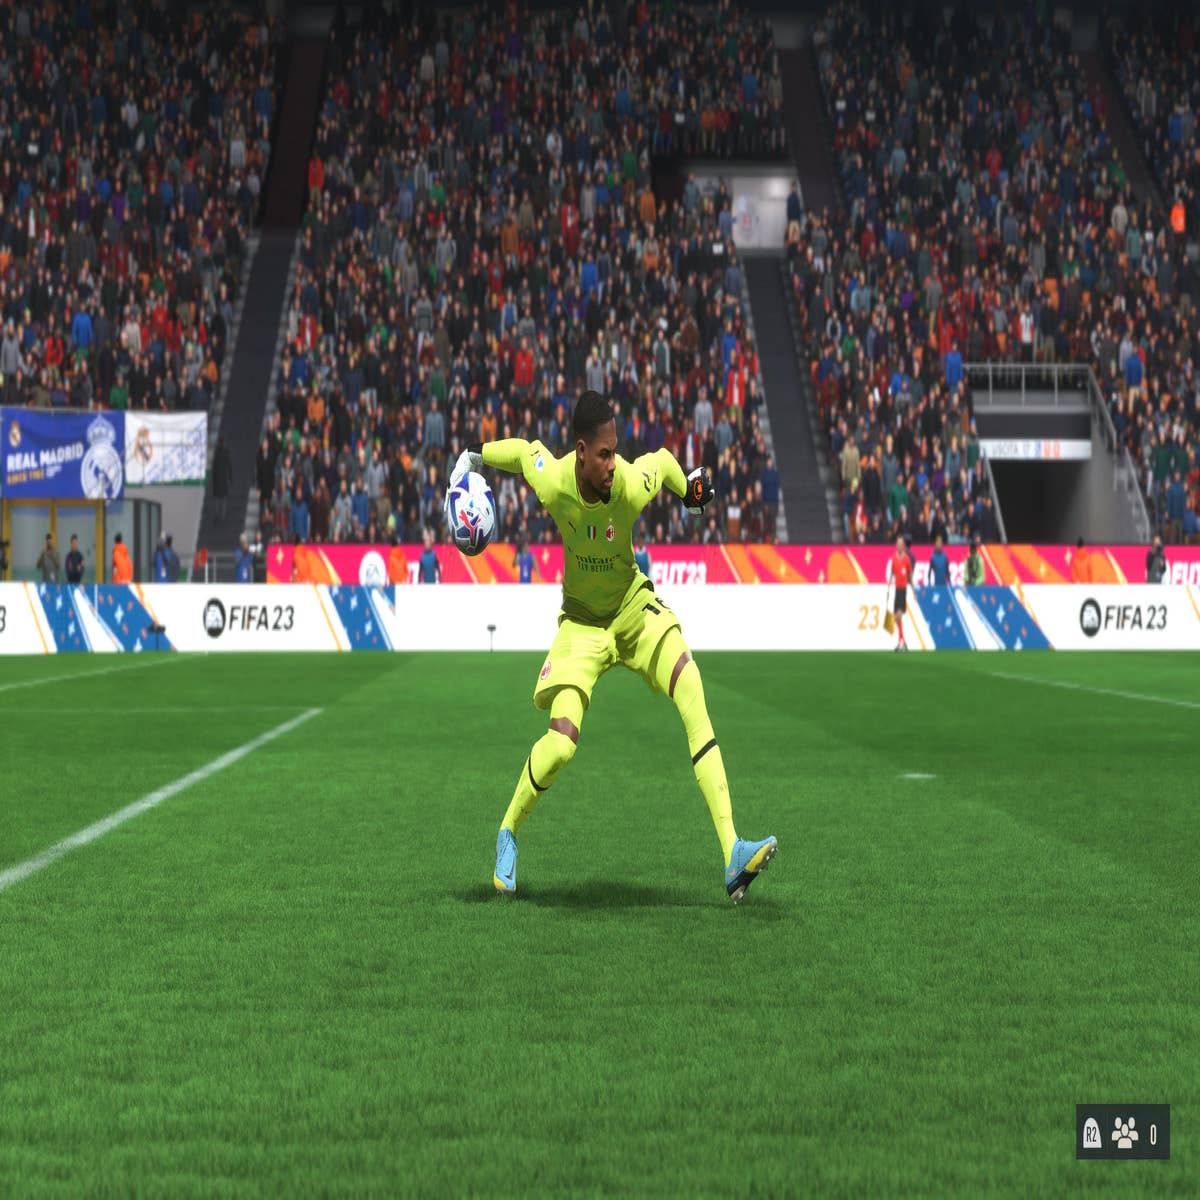 Ask AI: so, again, what is the current price of fifa 23 on the ps4